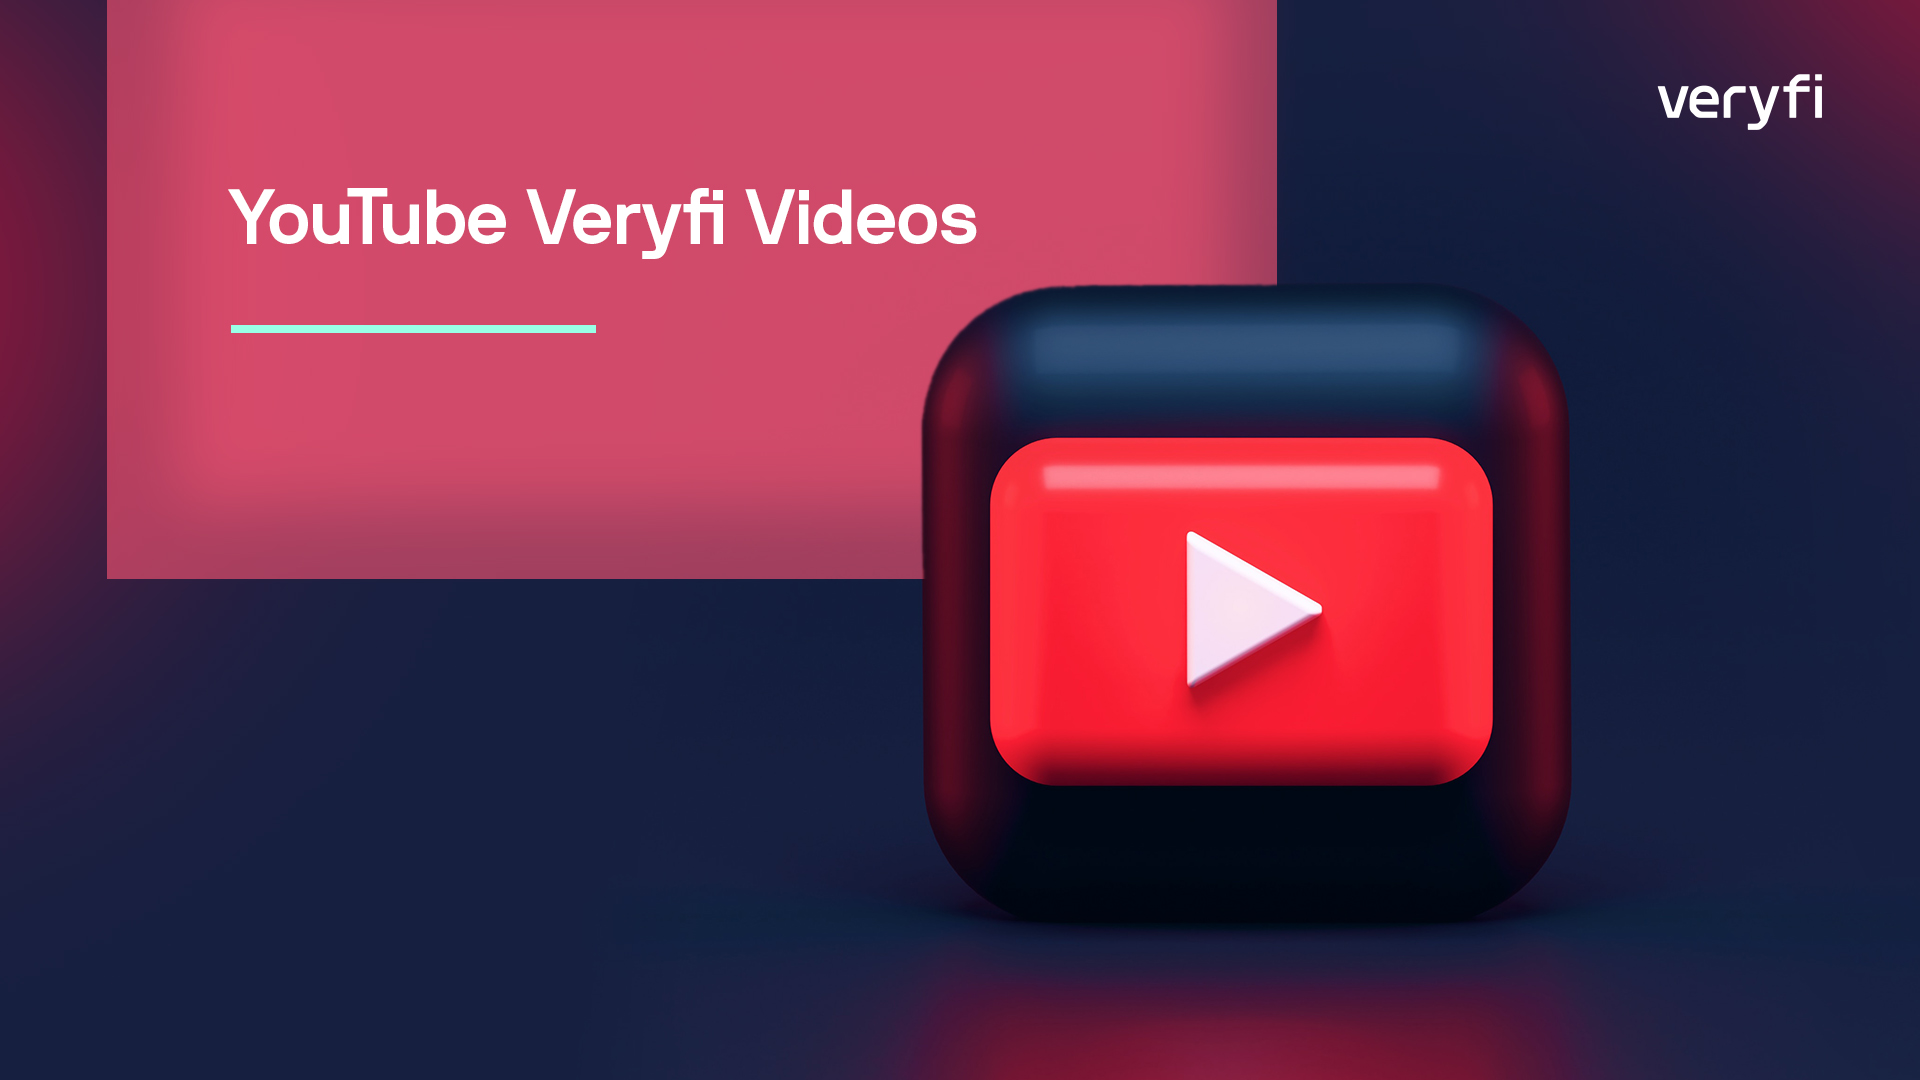 Videos of Veryfi Products & Services on YouTube